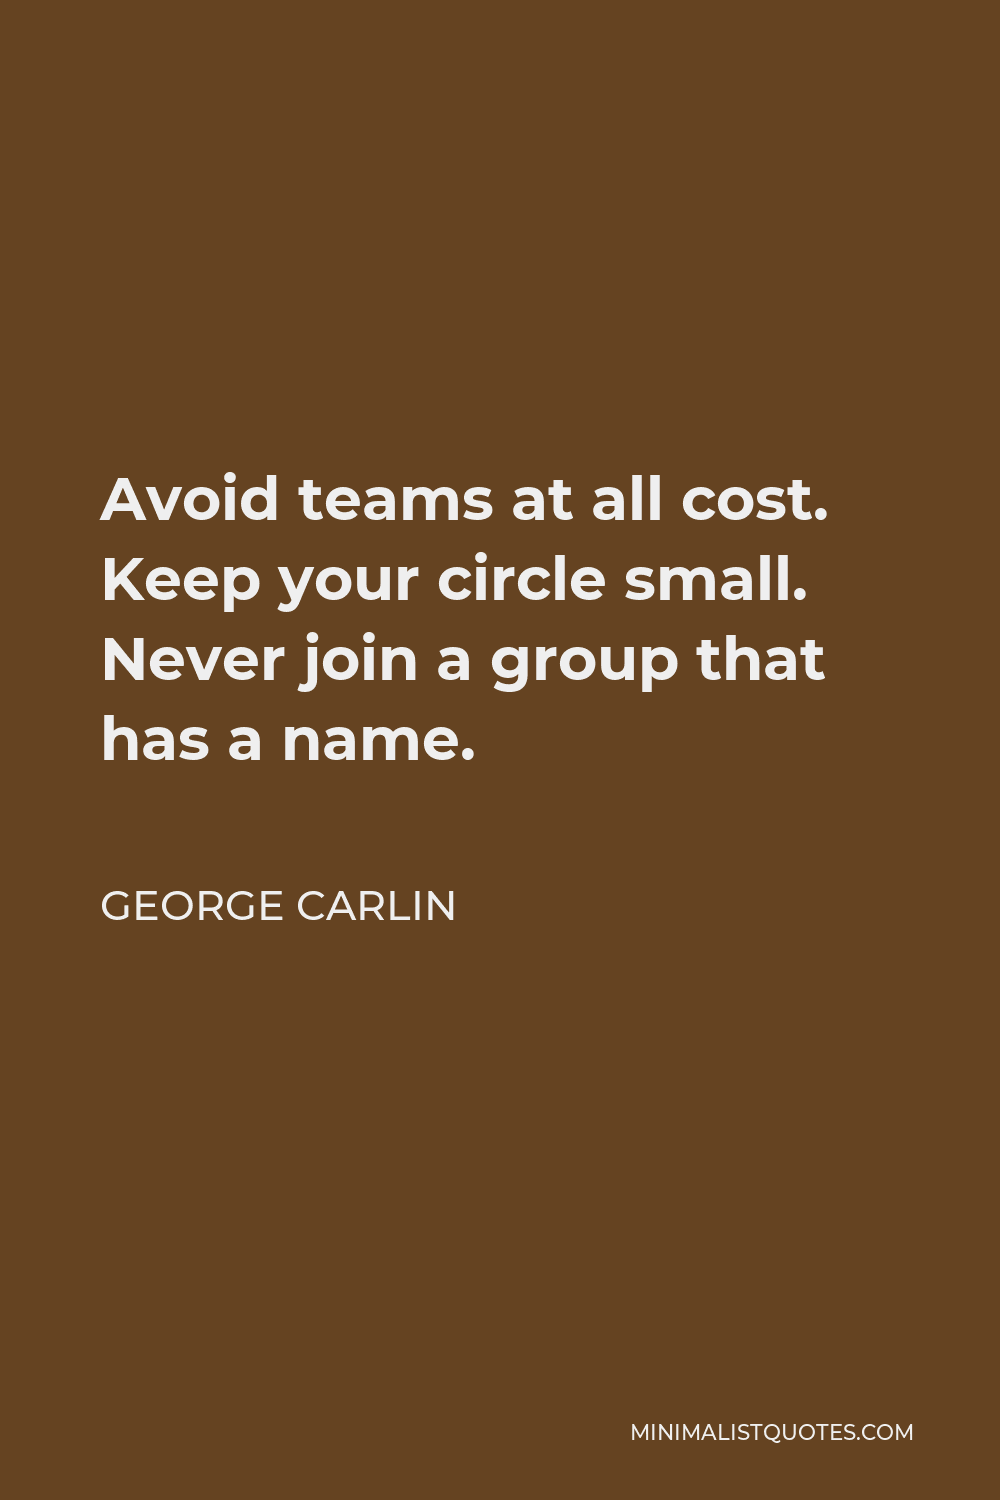 George Carlin Quote - Avoid teams at all cost. Keep your circle small. Never join a group that has a name.